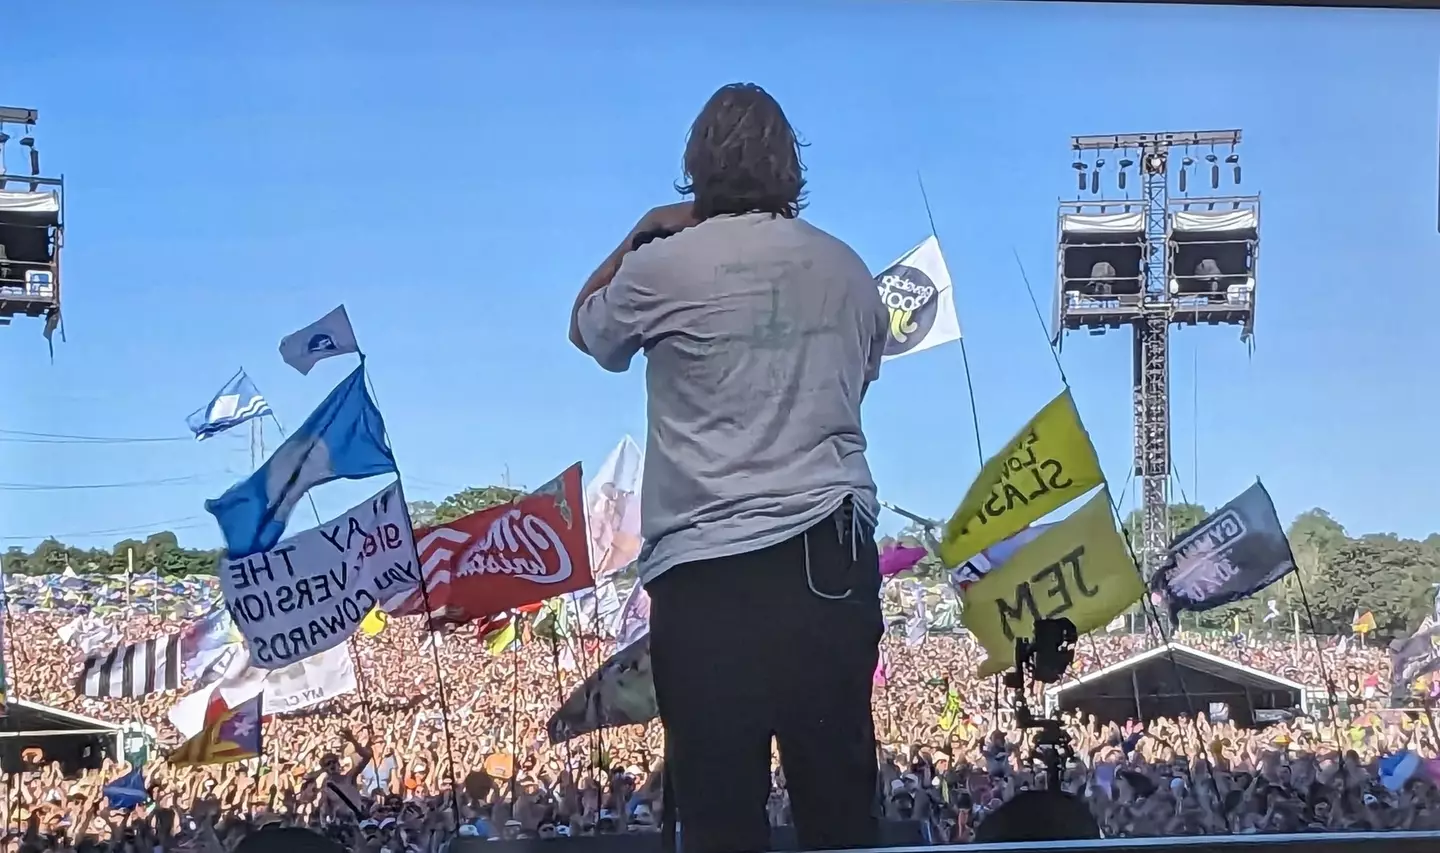 The 26-year-old powered through his Glastonbury set like an absolute champion as he took to the pyramid stage tonight (24 June).